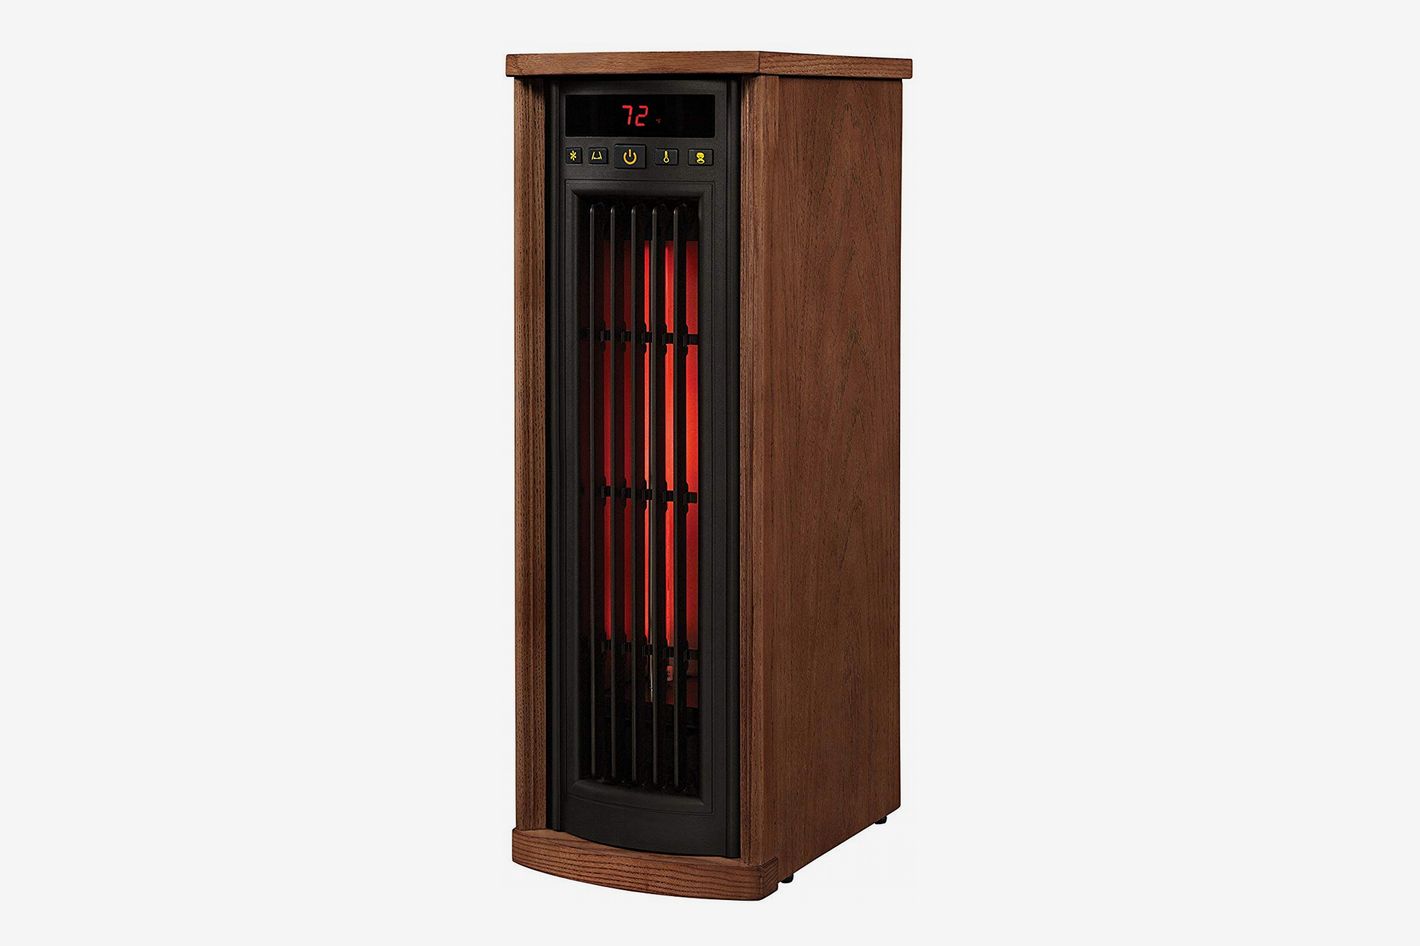 Duraflame Portable Electric Infrared Quartz Oscillating Tower Heater at Amazon